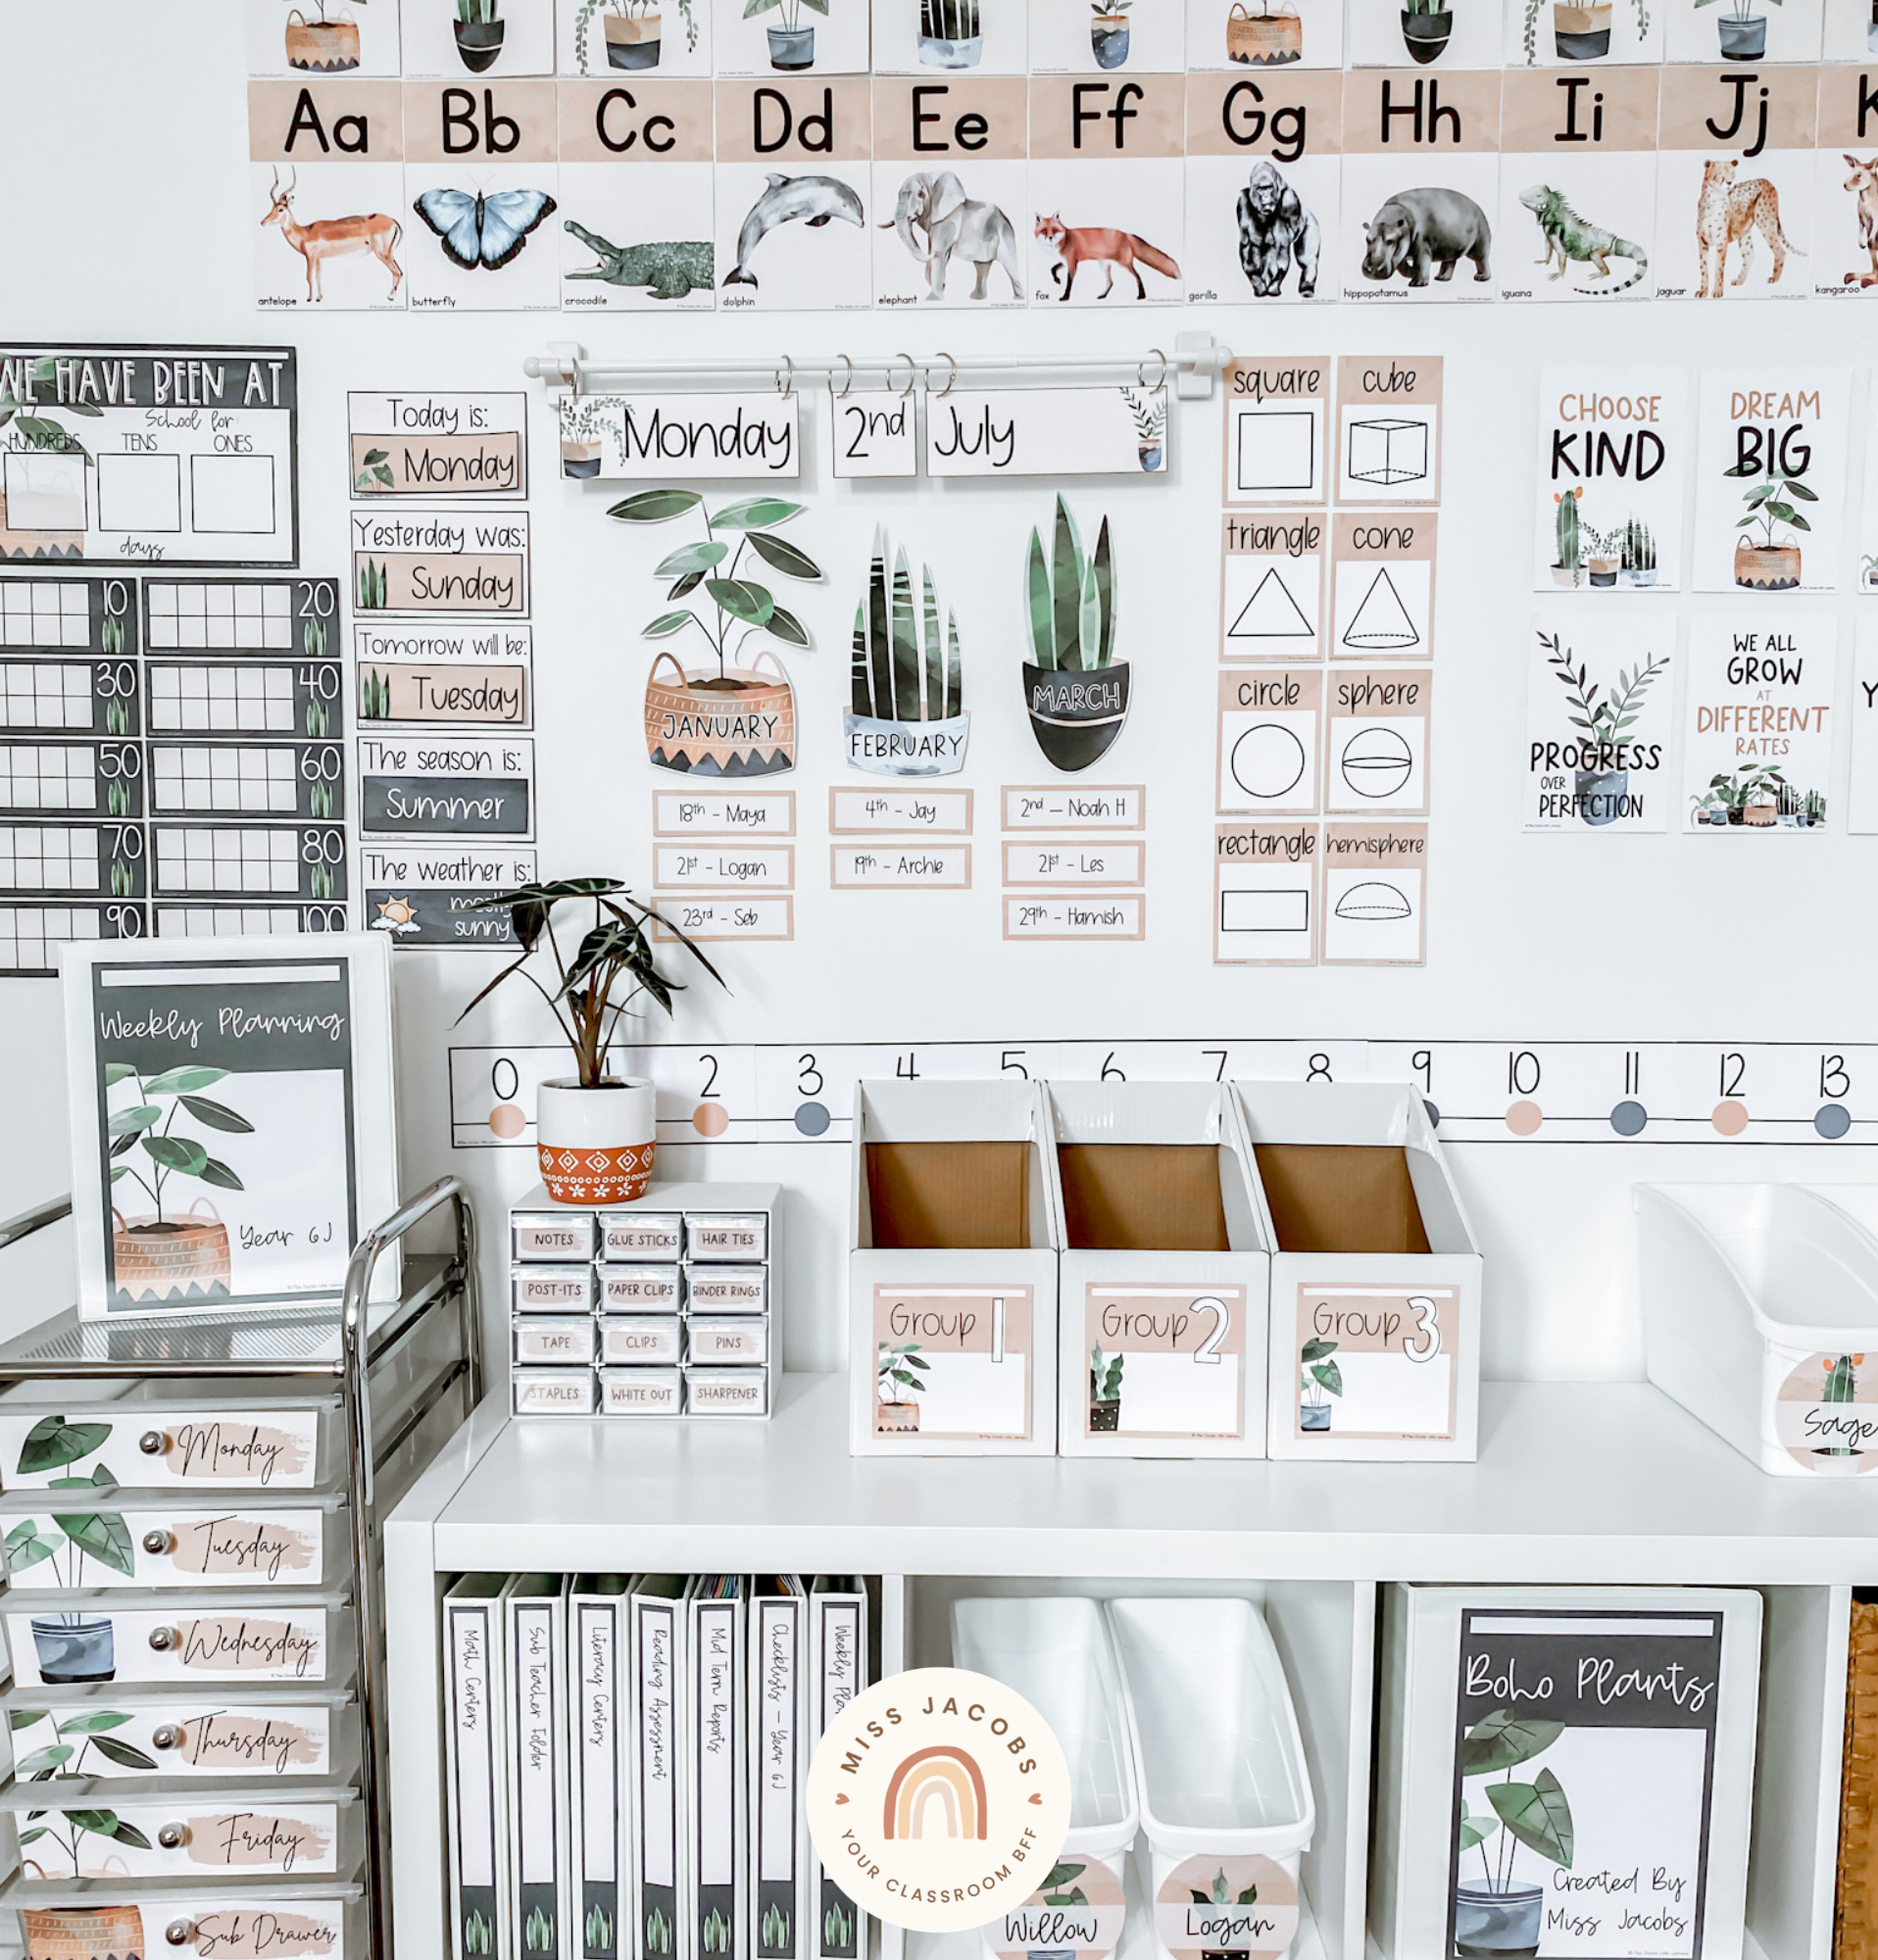 Two images show a wide range of the new Boho Plants decor products. The left images shows a shelving unit with magazine boxes on top and a small set of mini drawers colloquially called a ‘teachers toolbox.’ Then to the side is a taller series of draws on a trolley. The wall shows alphabet posters and a number of calendar displays. The tones are all earthy with nudes, white, greens, blues and pops of orange. The right image is a closer angle and shows a series of motivational posters, and posters showing different colours.